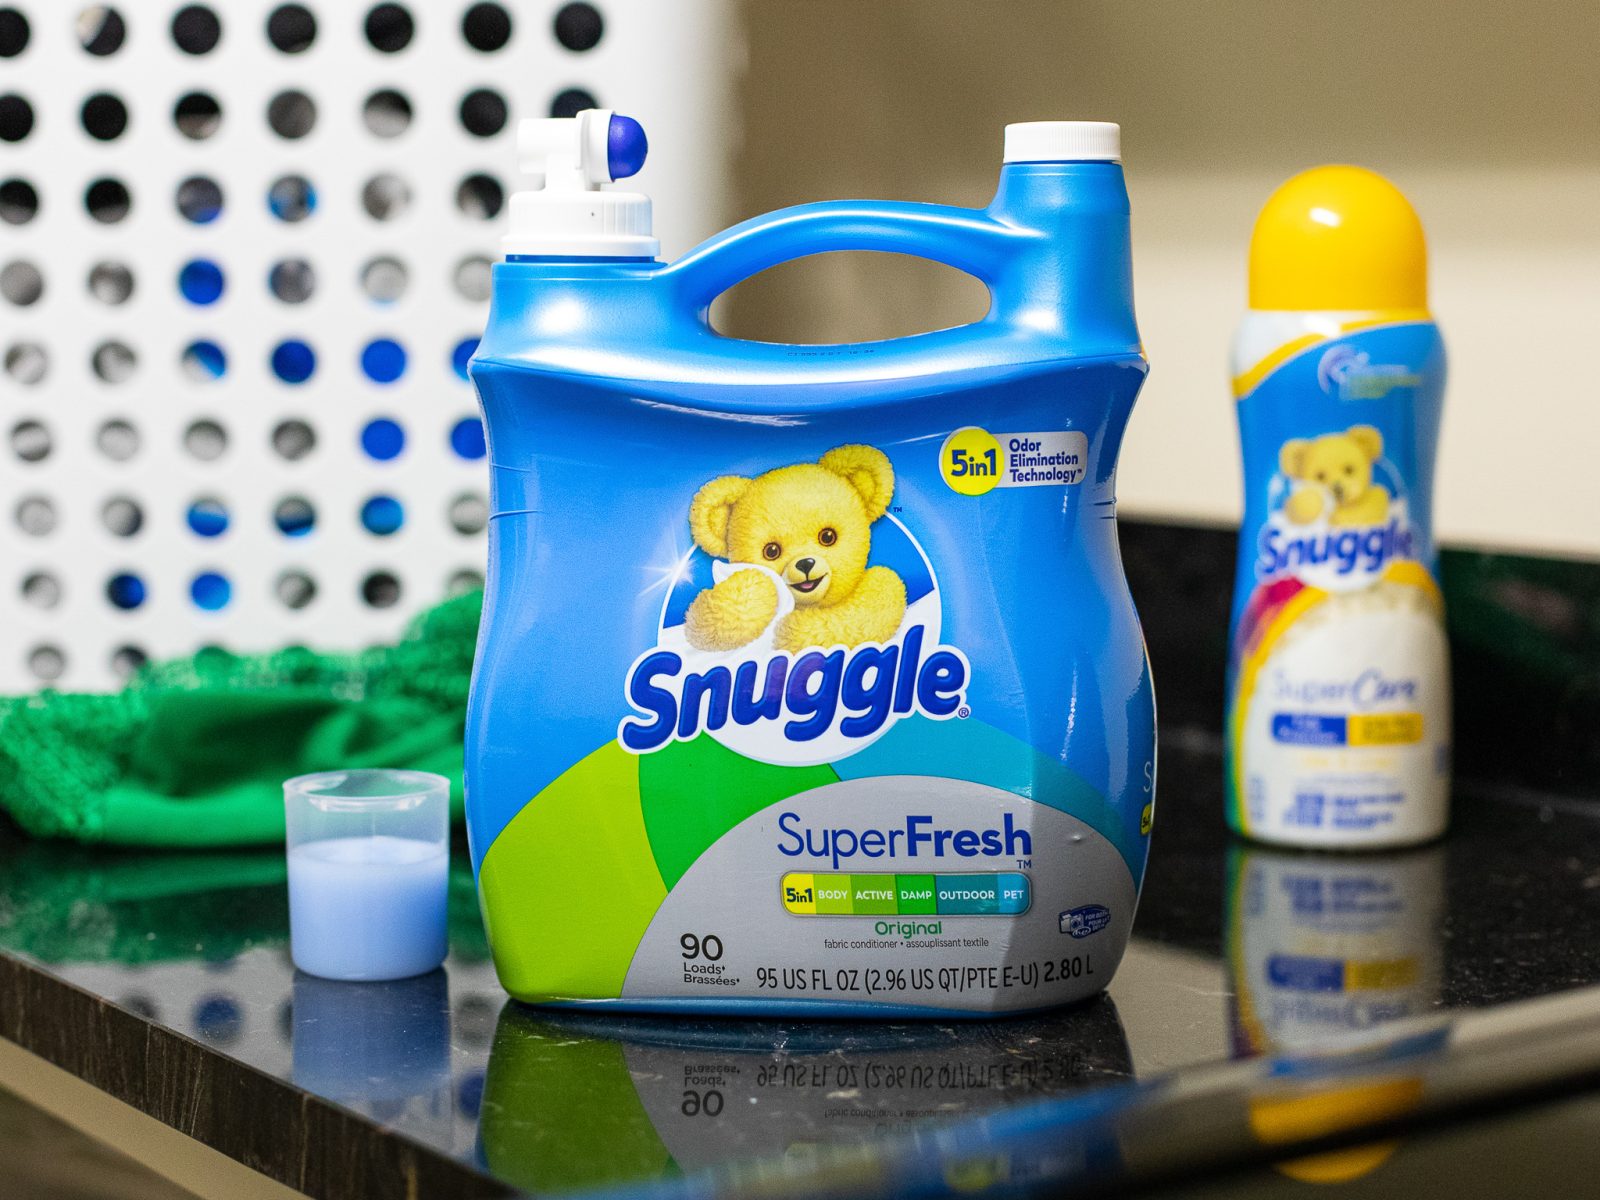 Big Bottles Of Snuggle Fabric Softener As Low As $4.49 At Kroger With New Insert Coupon